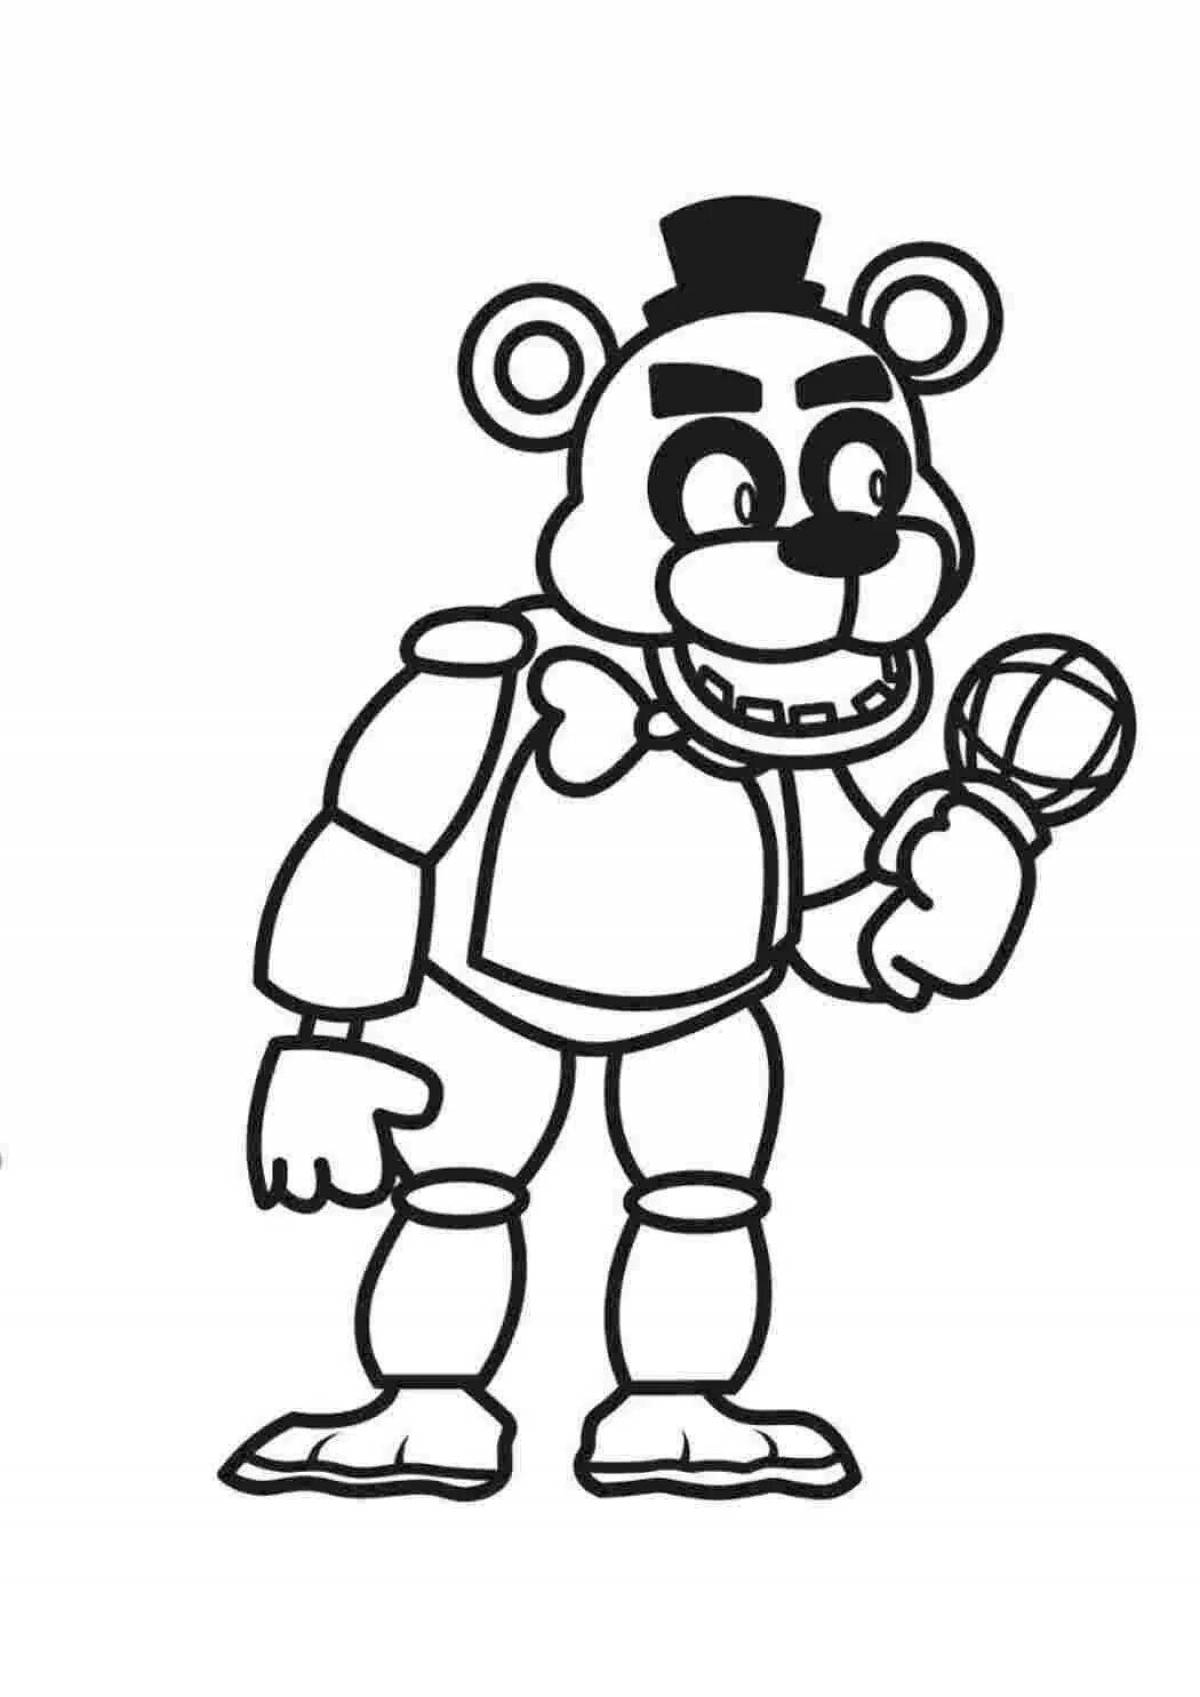 Golden freddy's royal coloring